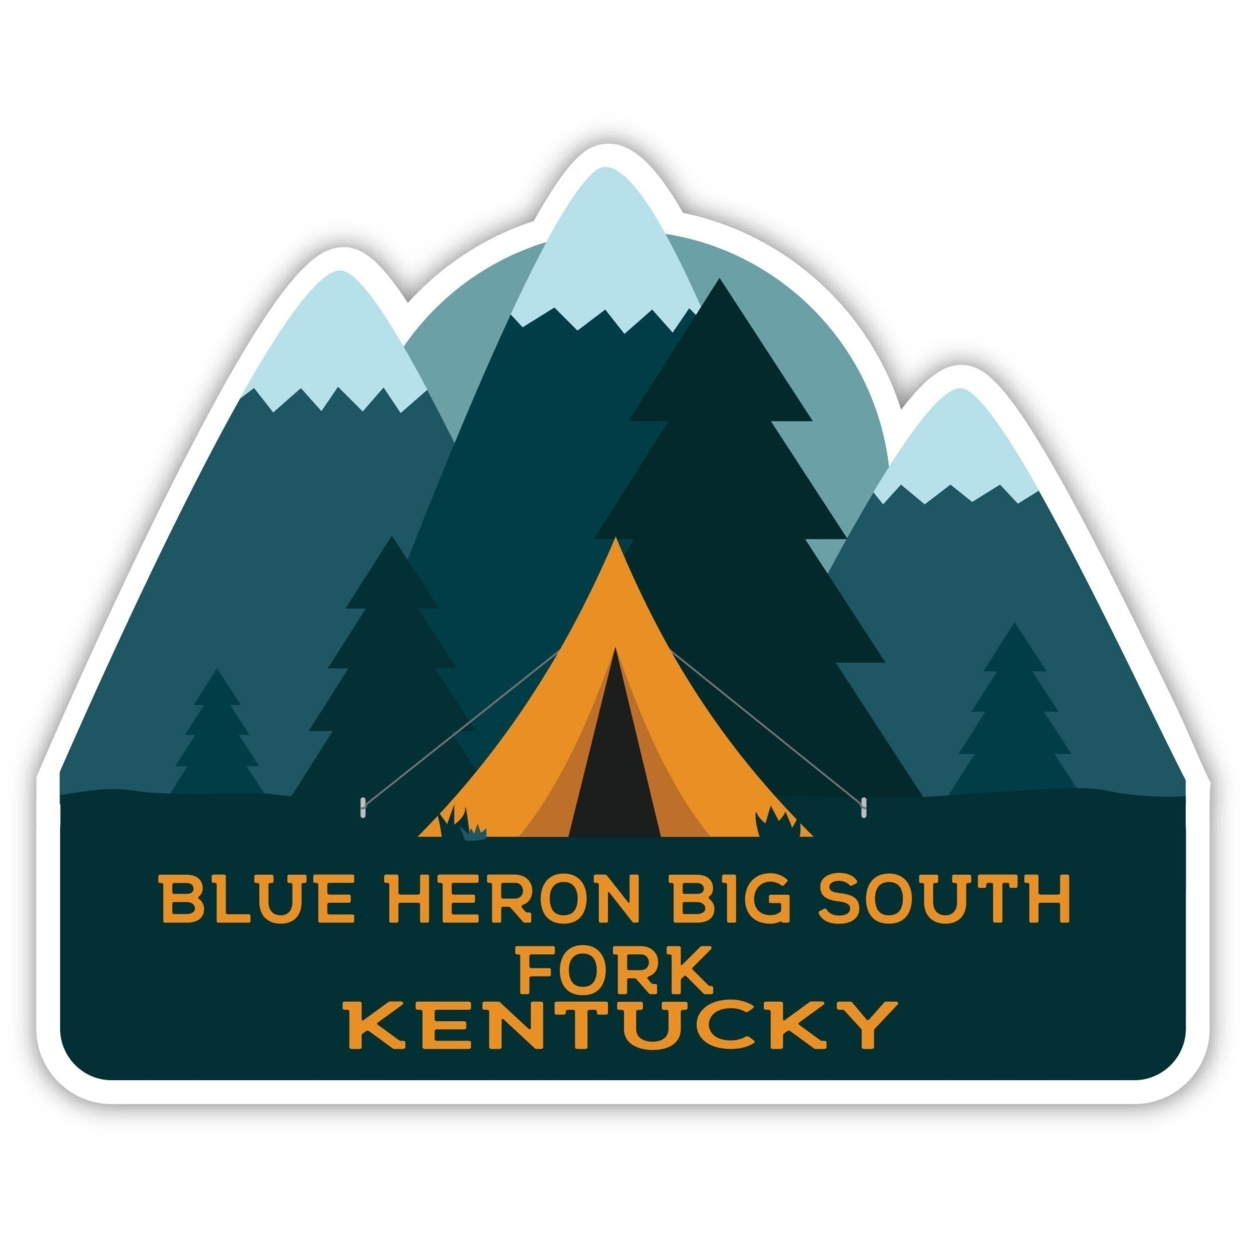 Blue Heron Big South Fork Kentucky Souvenir Decorative Stickers (Choose Theme And Size) - 4-Pack, 8-Inch, Tent